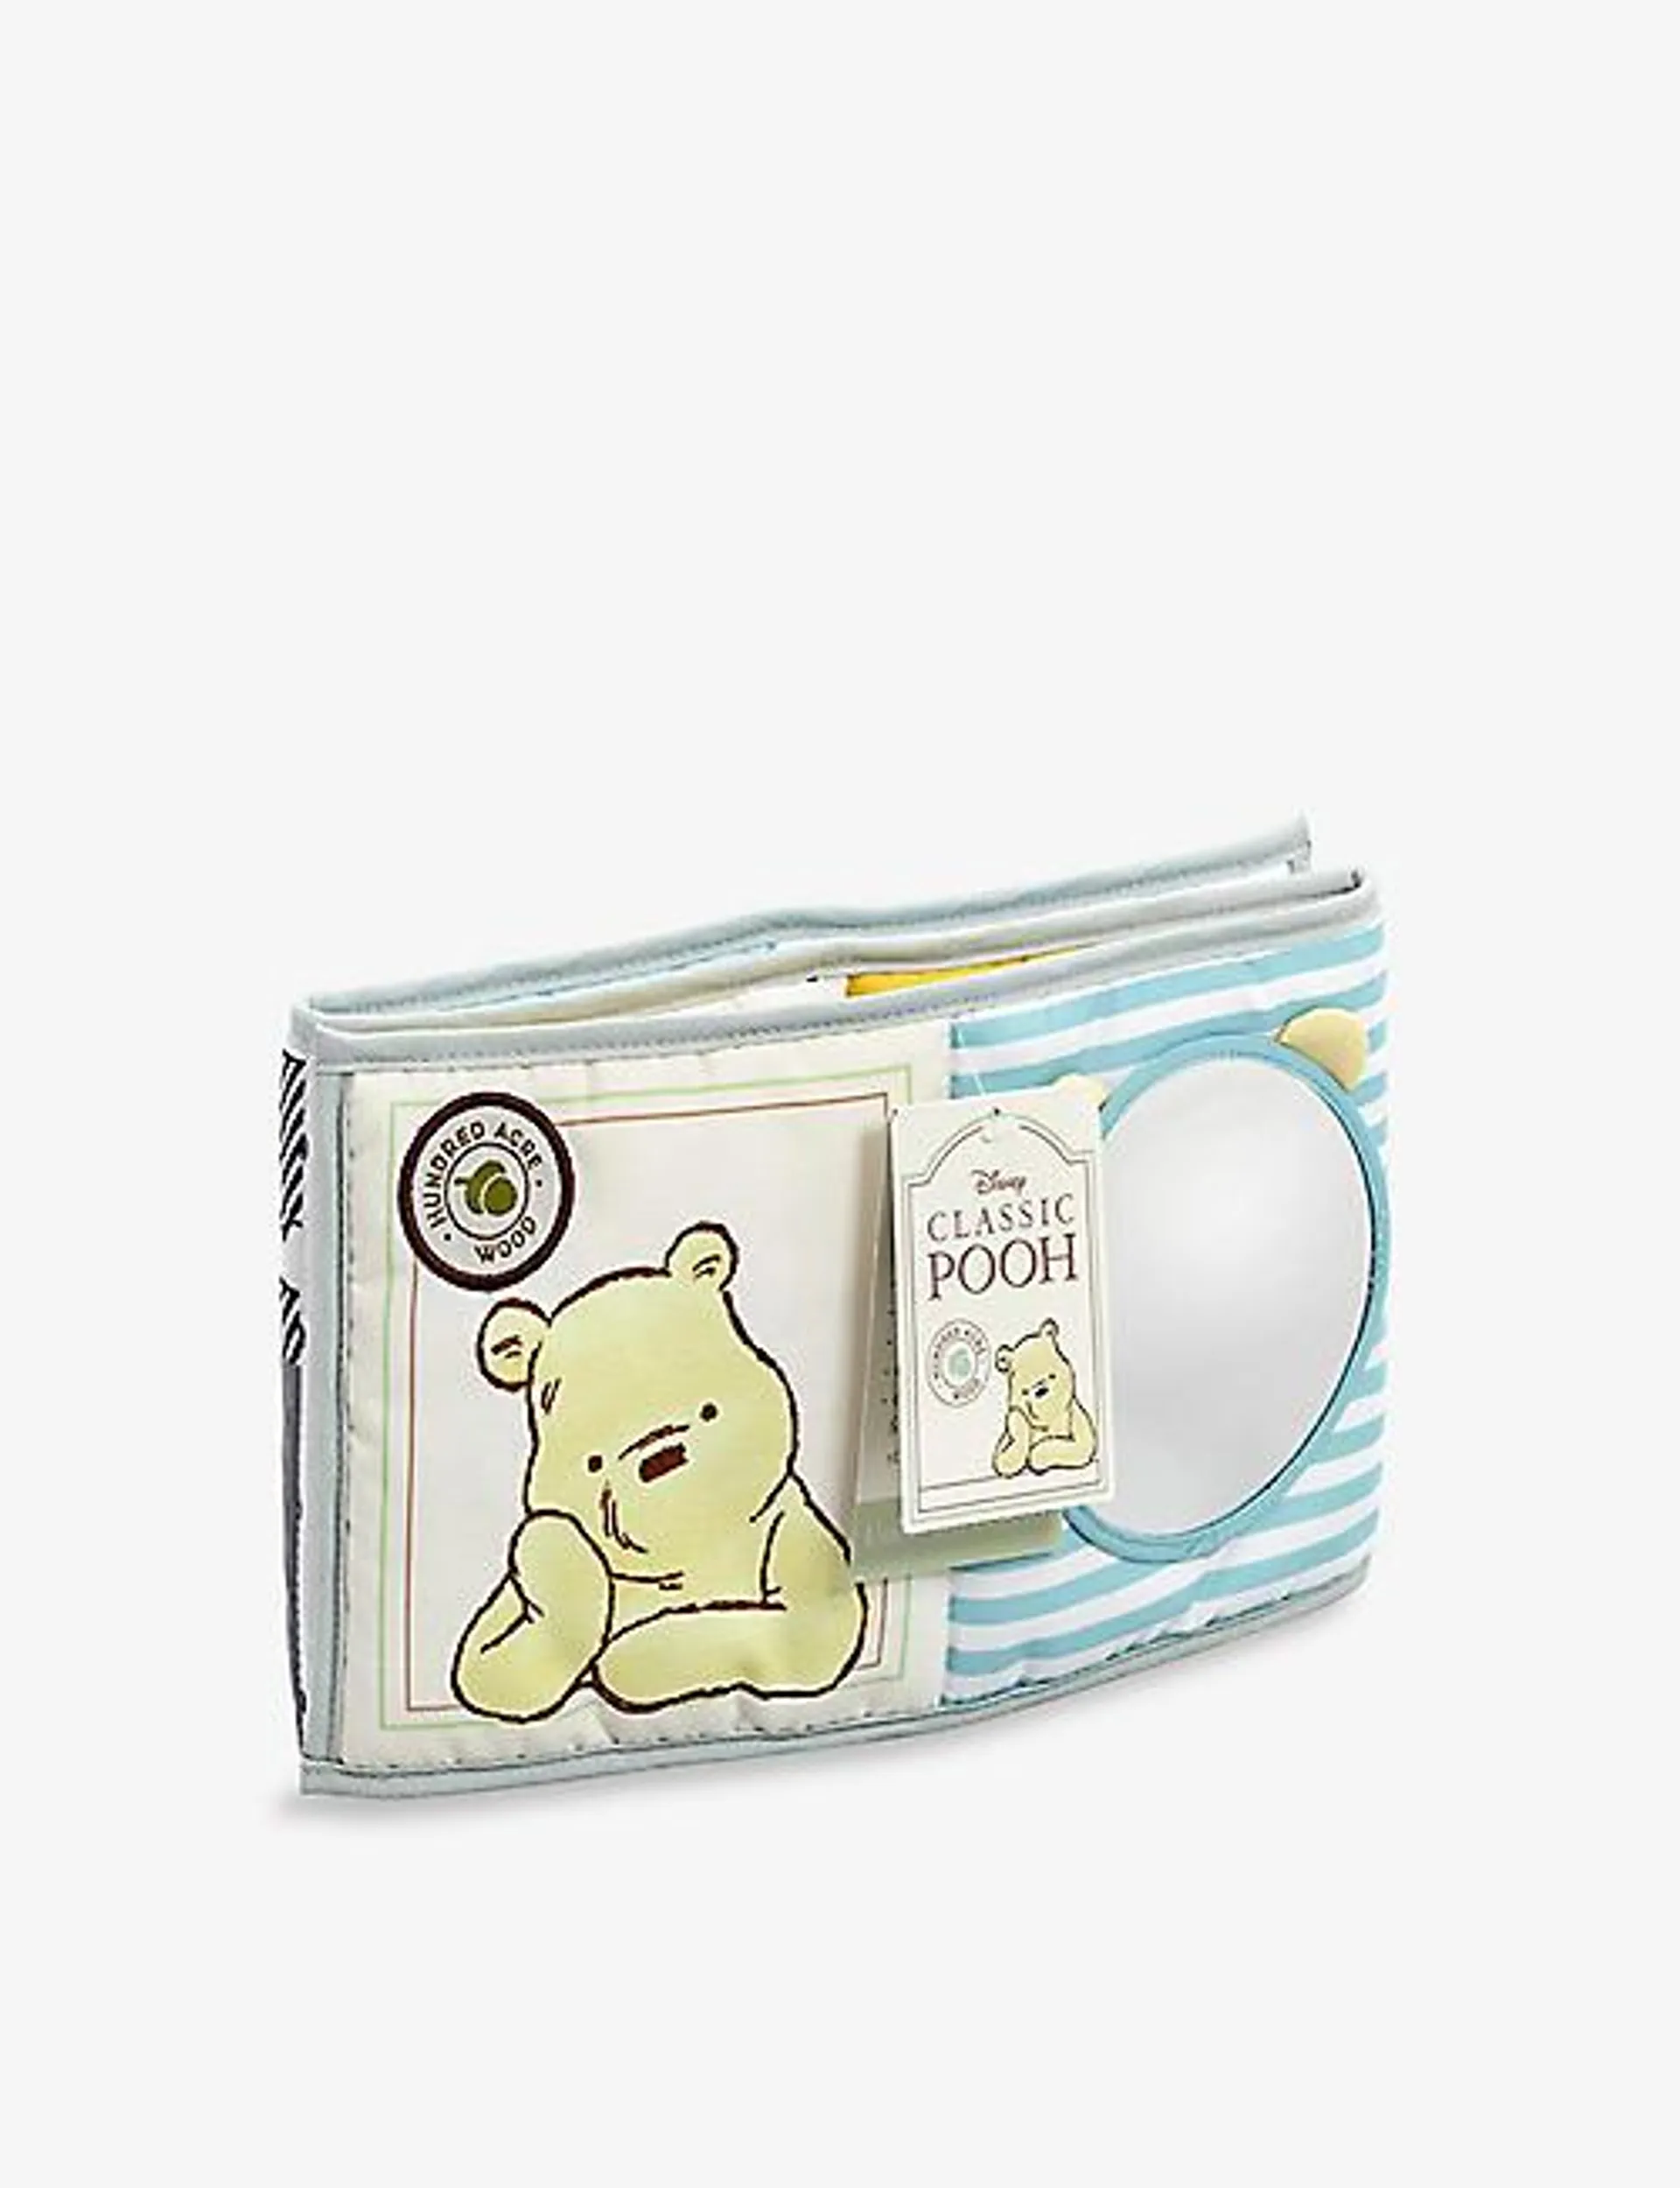 Classic Pooh Unfold & Discover play book